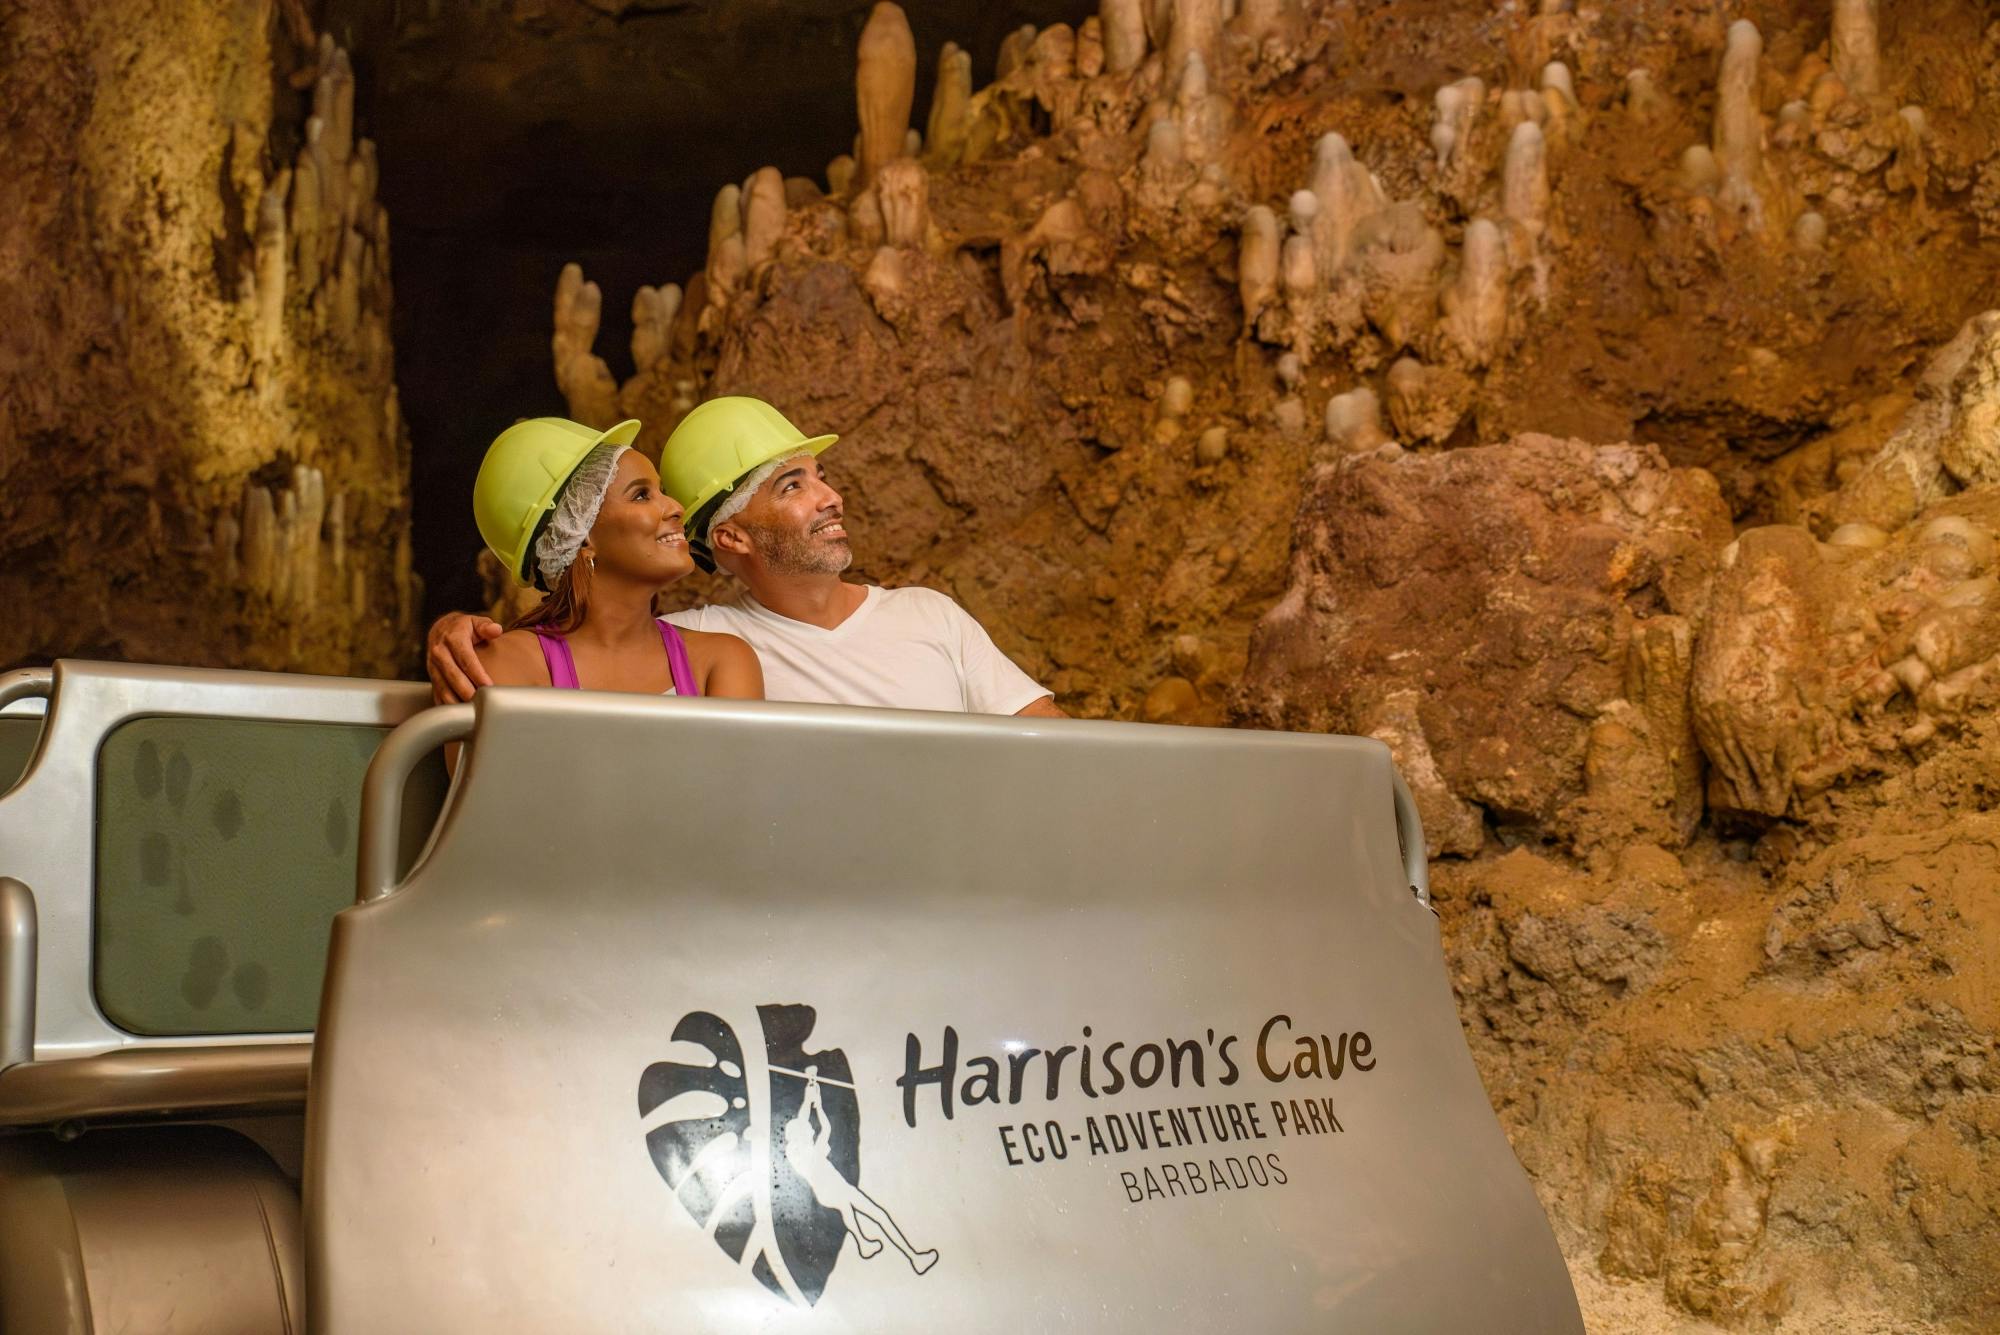 Harrison's Cave Eco-Adventure Park Ticket & Gully Challenge Course